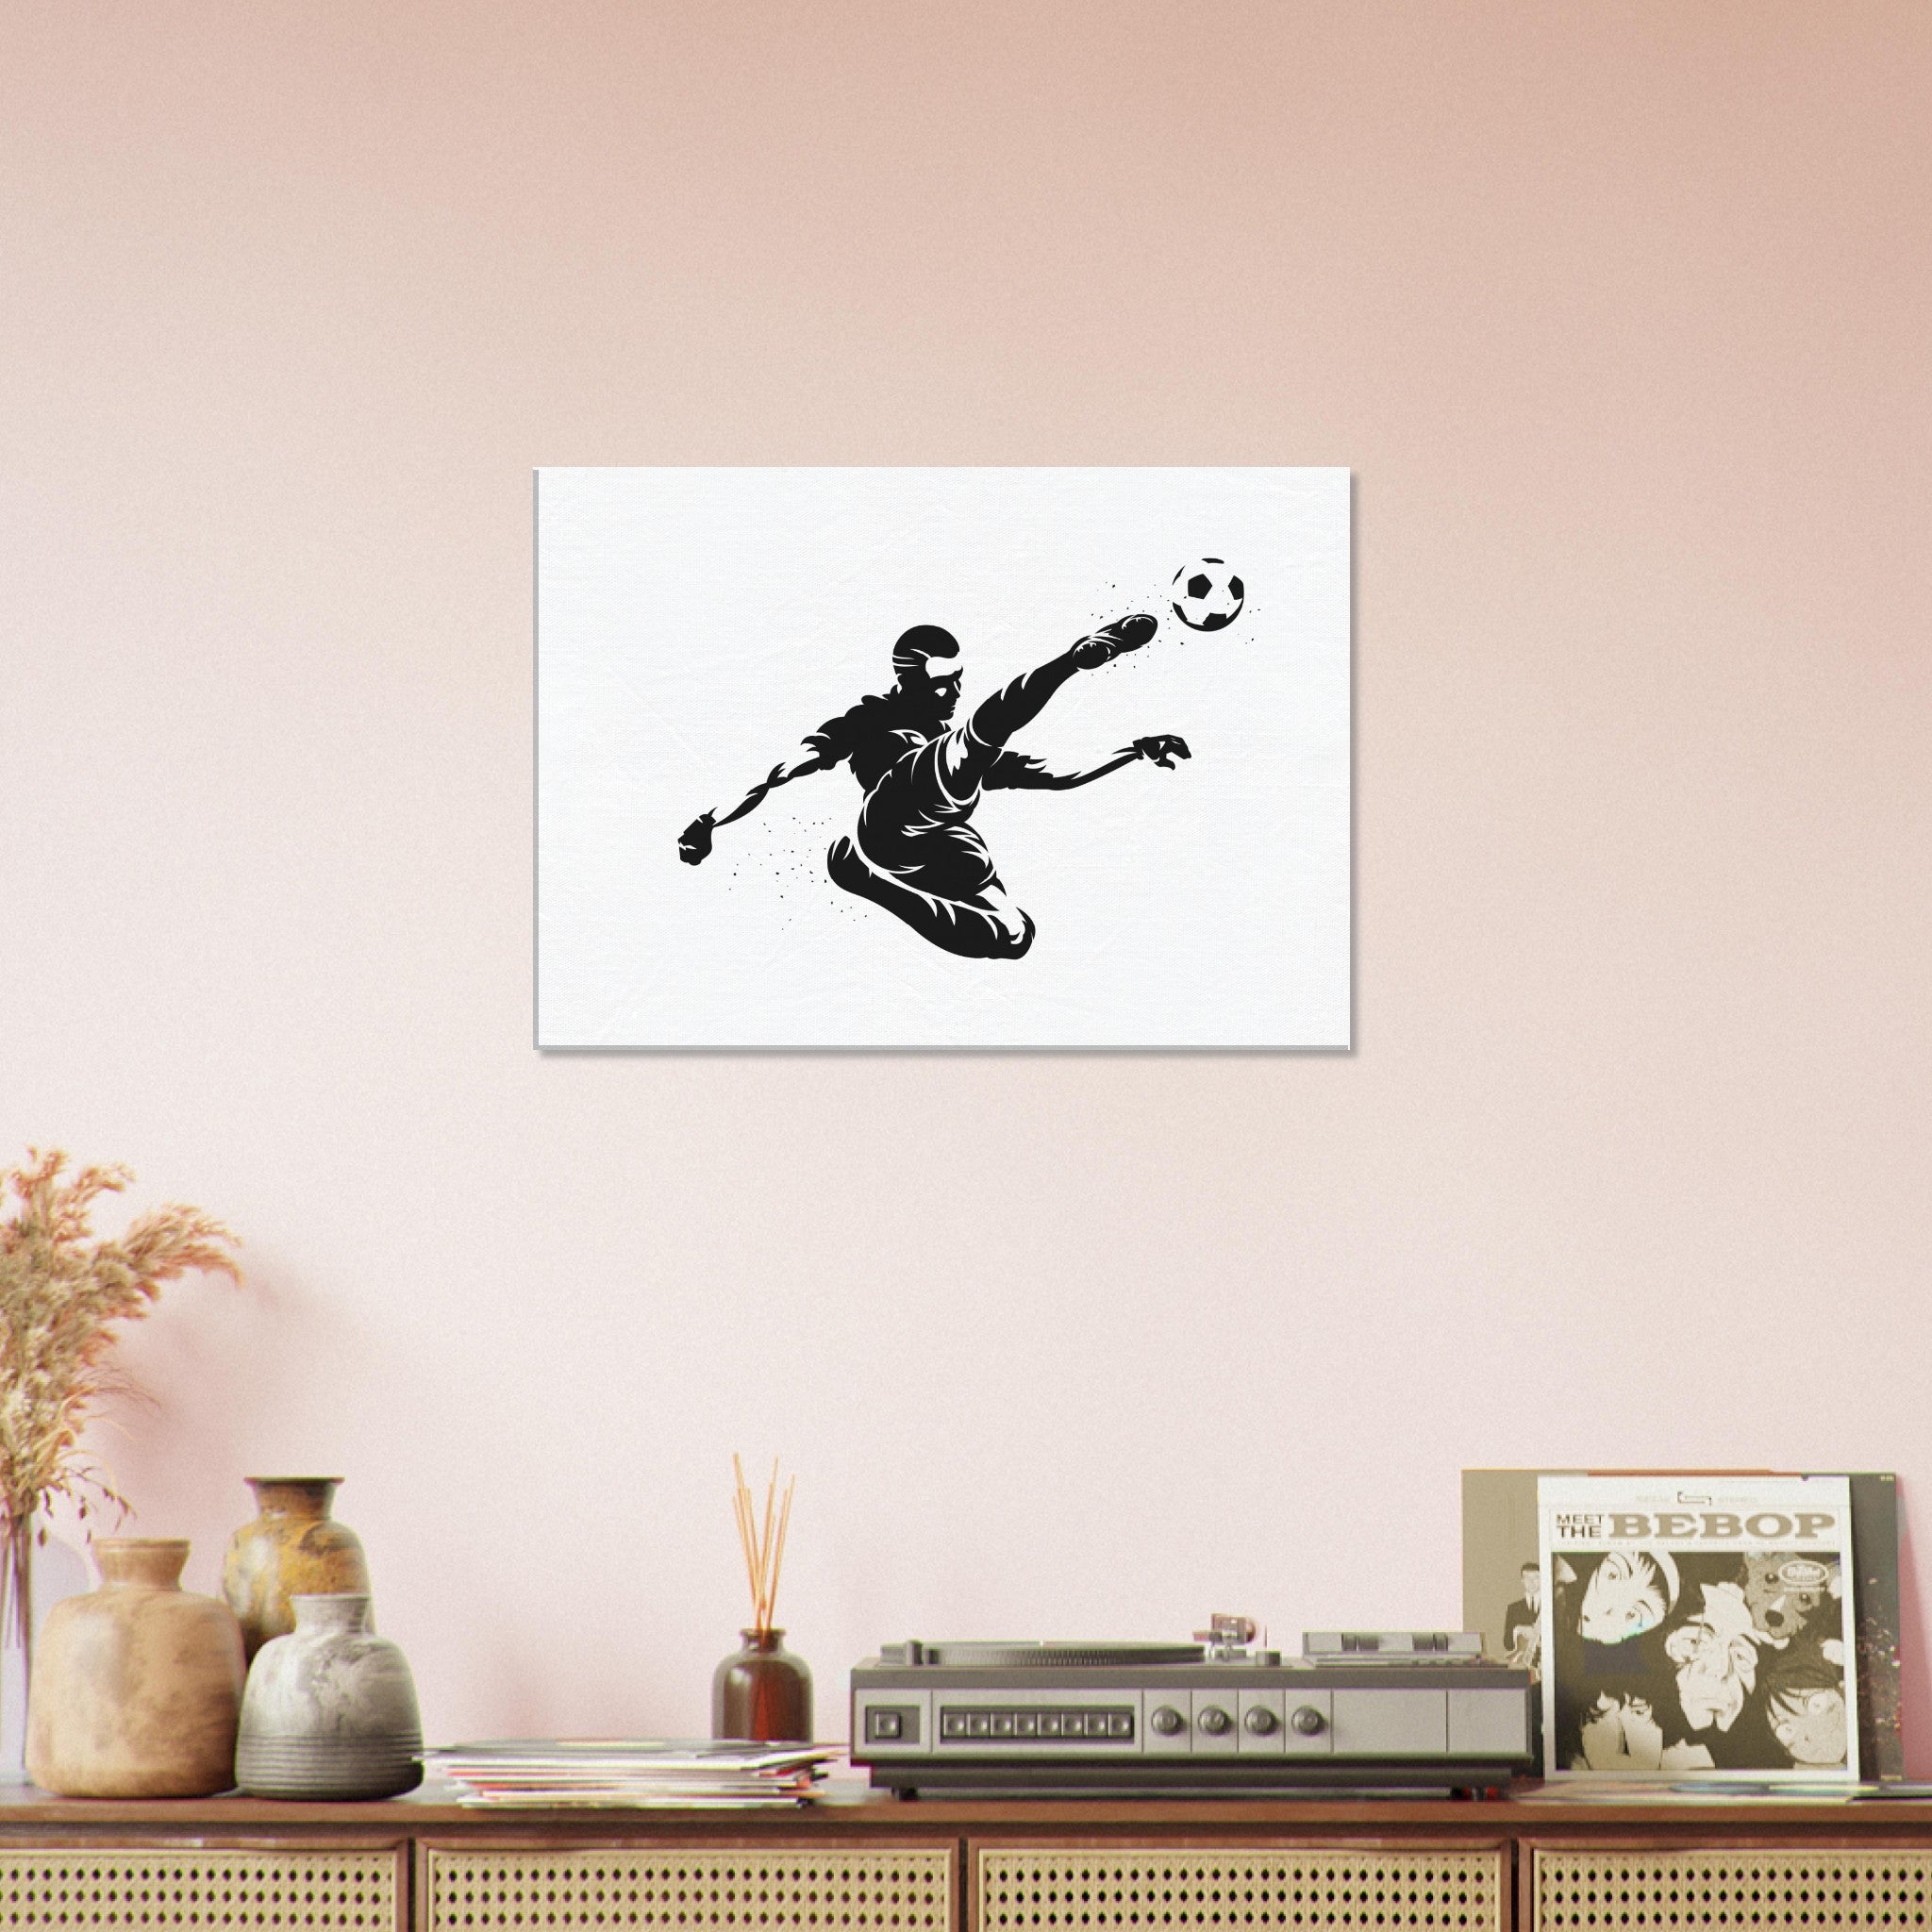 Soccer Player Silhouette Volley Kick Canvas